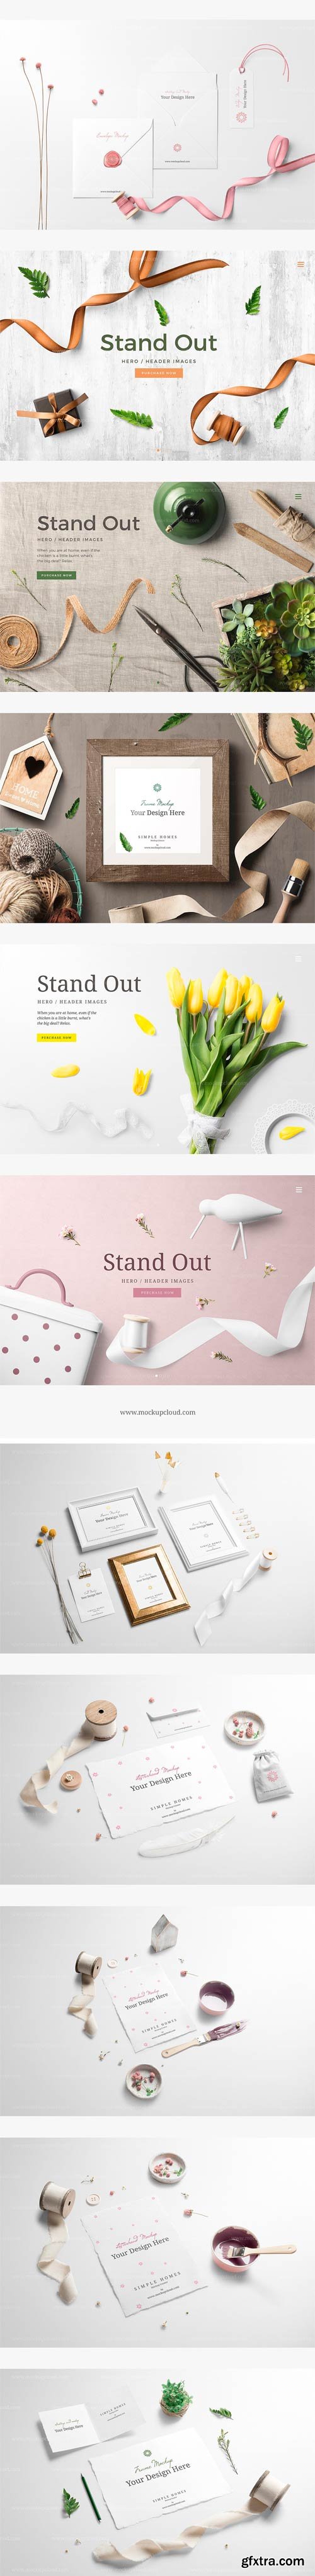 Download Photoshop Mock Ups Page 2751